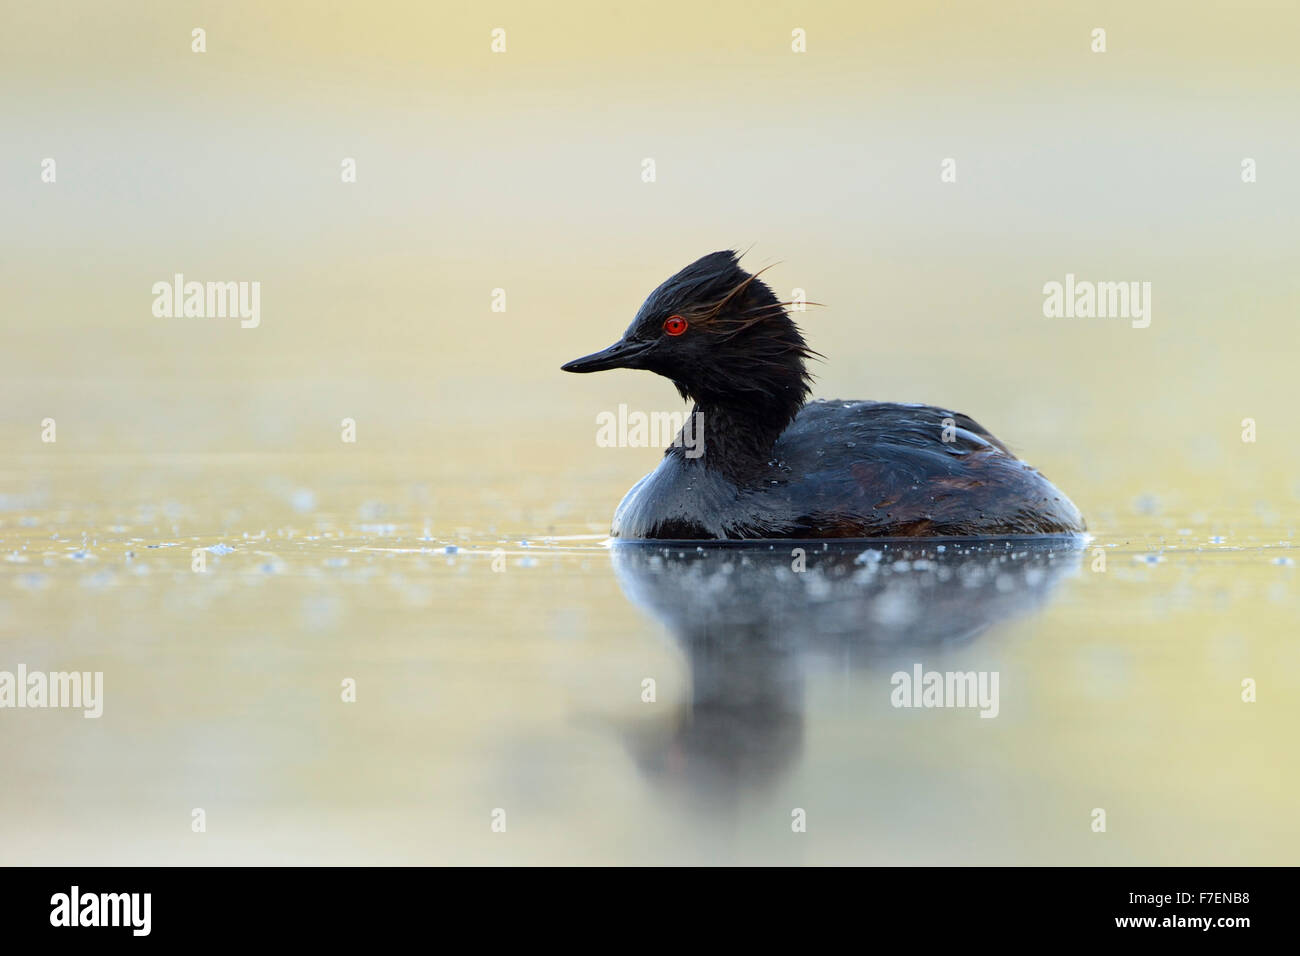 Black-necked Grebe / Eared Grebe ( Podiceps nigricollis ), wet from diving, swims on nice colored water, looking around. Stock Photo